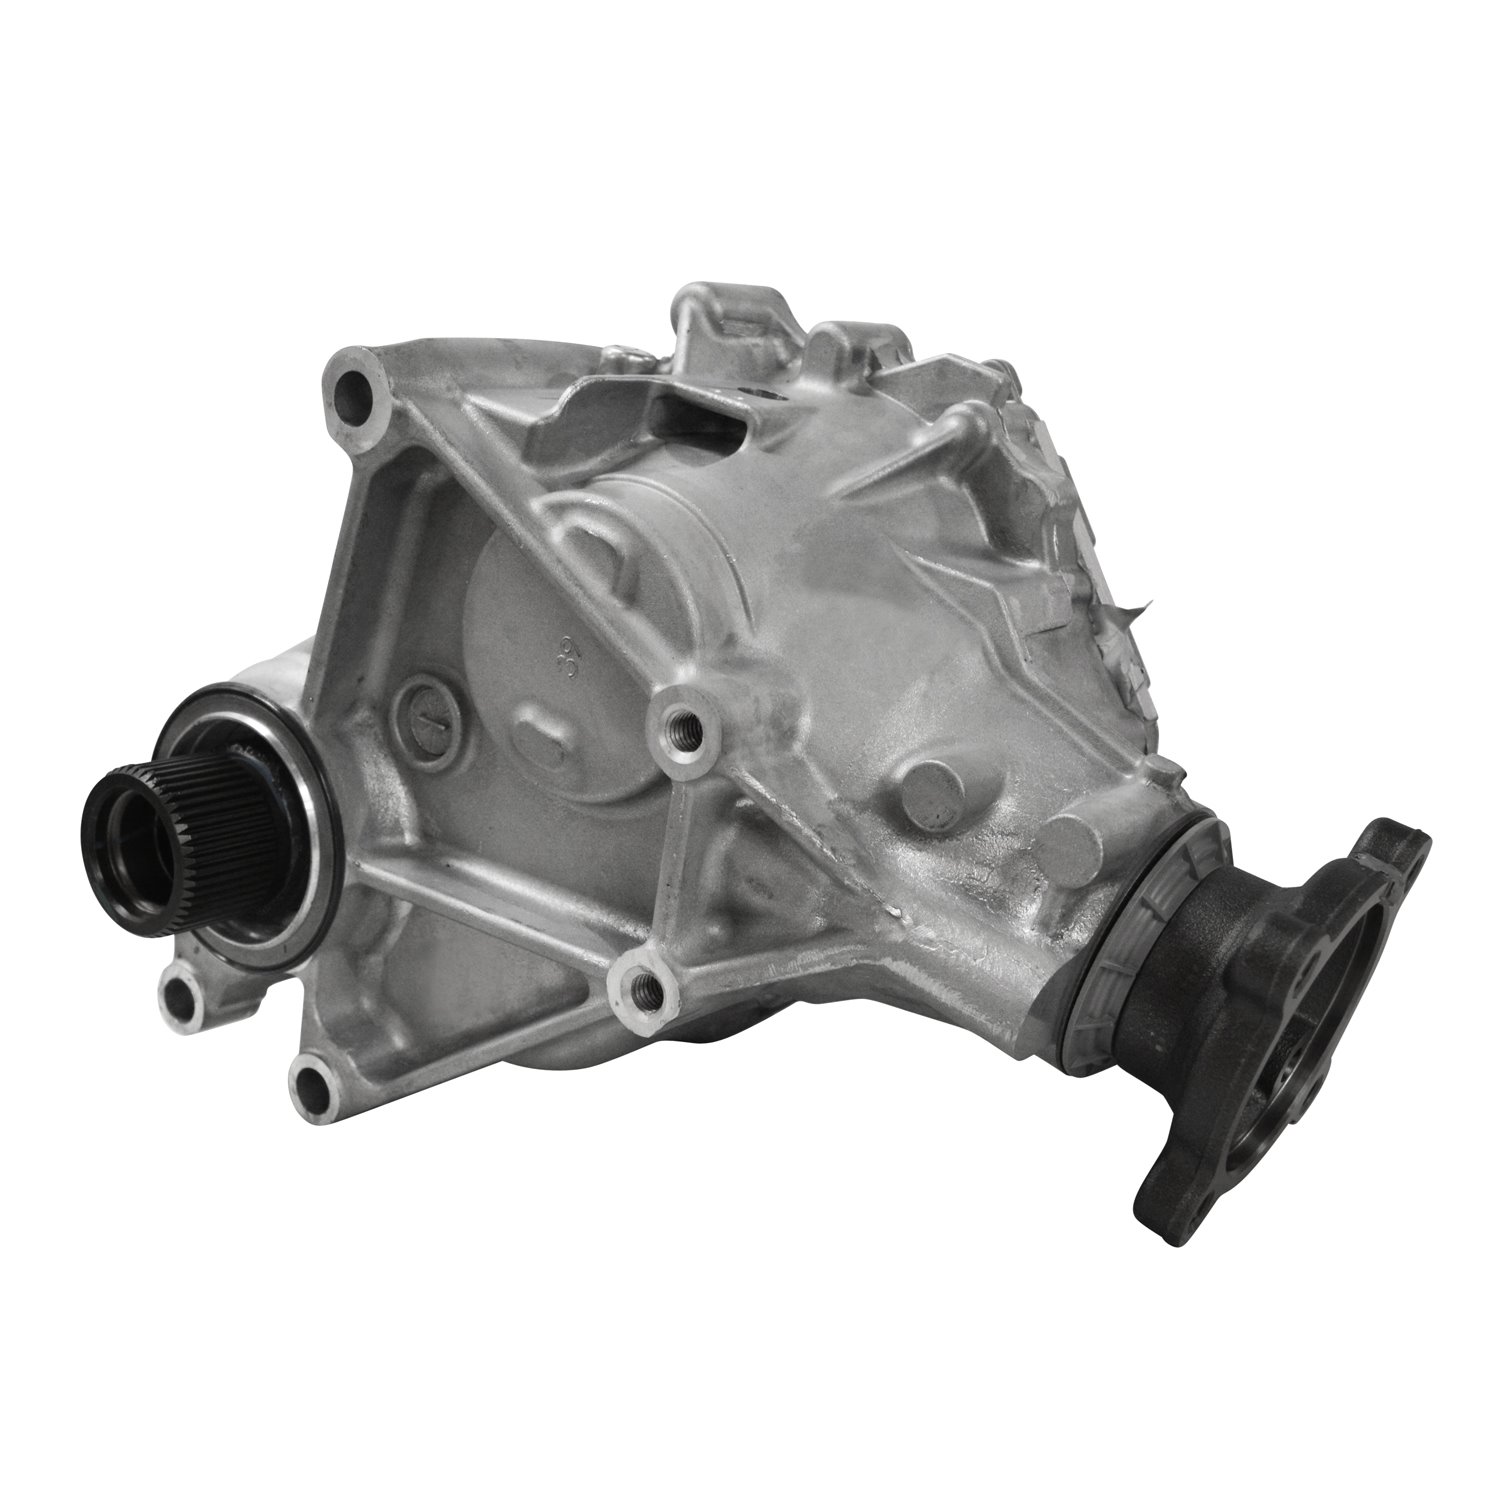 Remanufactured Transfer Case for Mazda CX-9 with 9 Bolt Side Cover